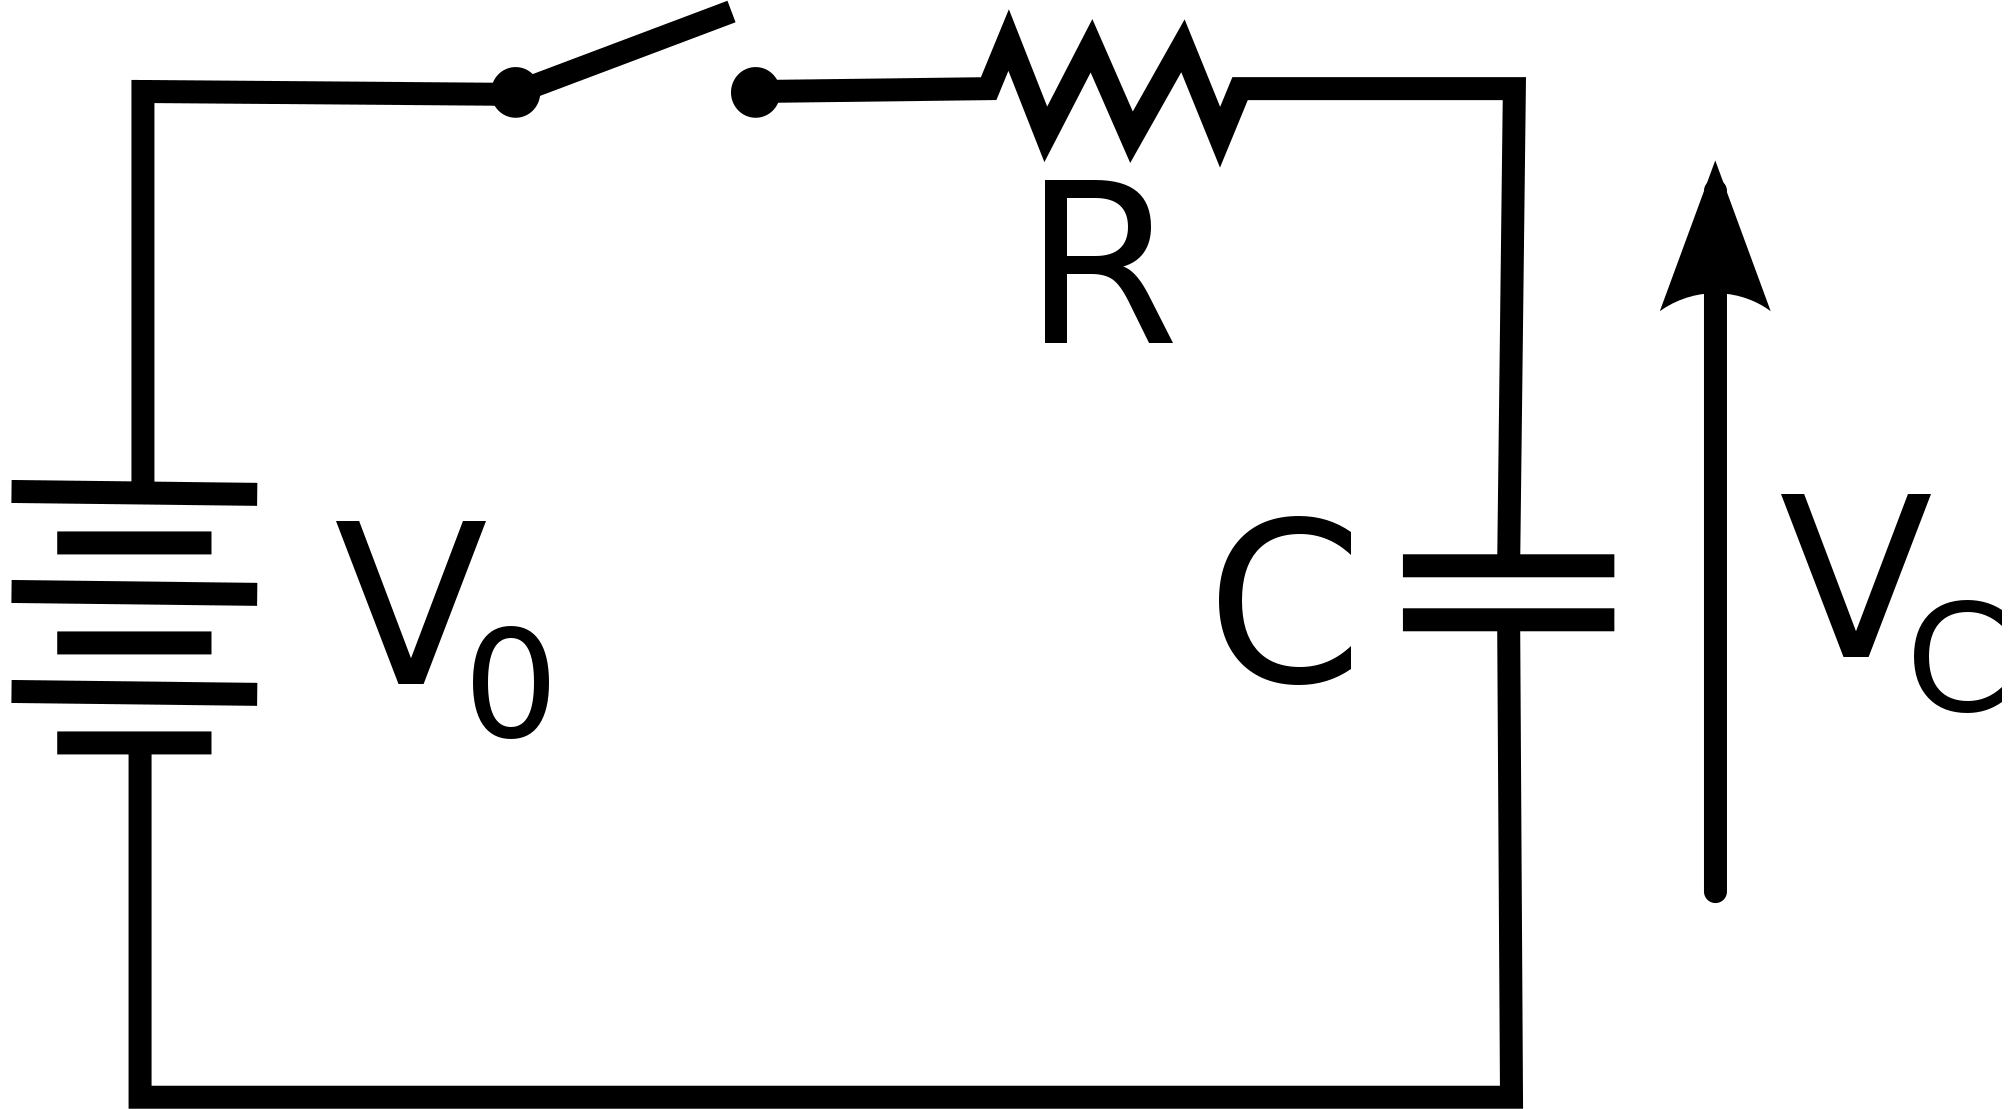 A stylized figure of a circuit that uses symbols to communication the circuit design. 